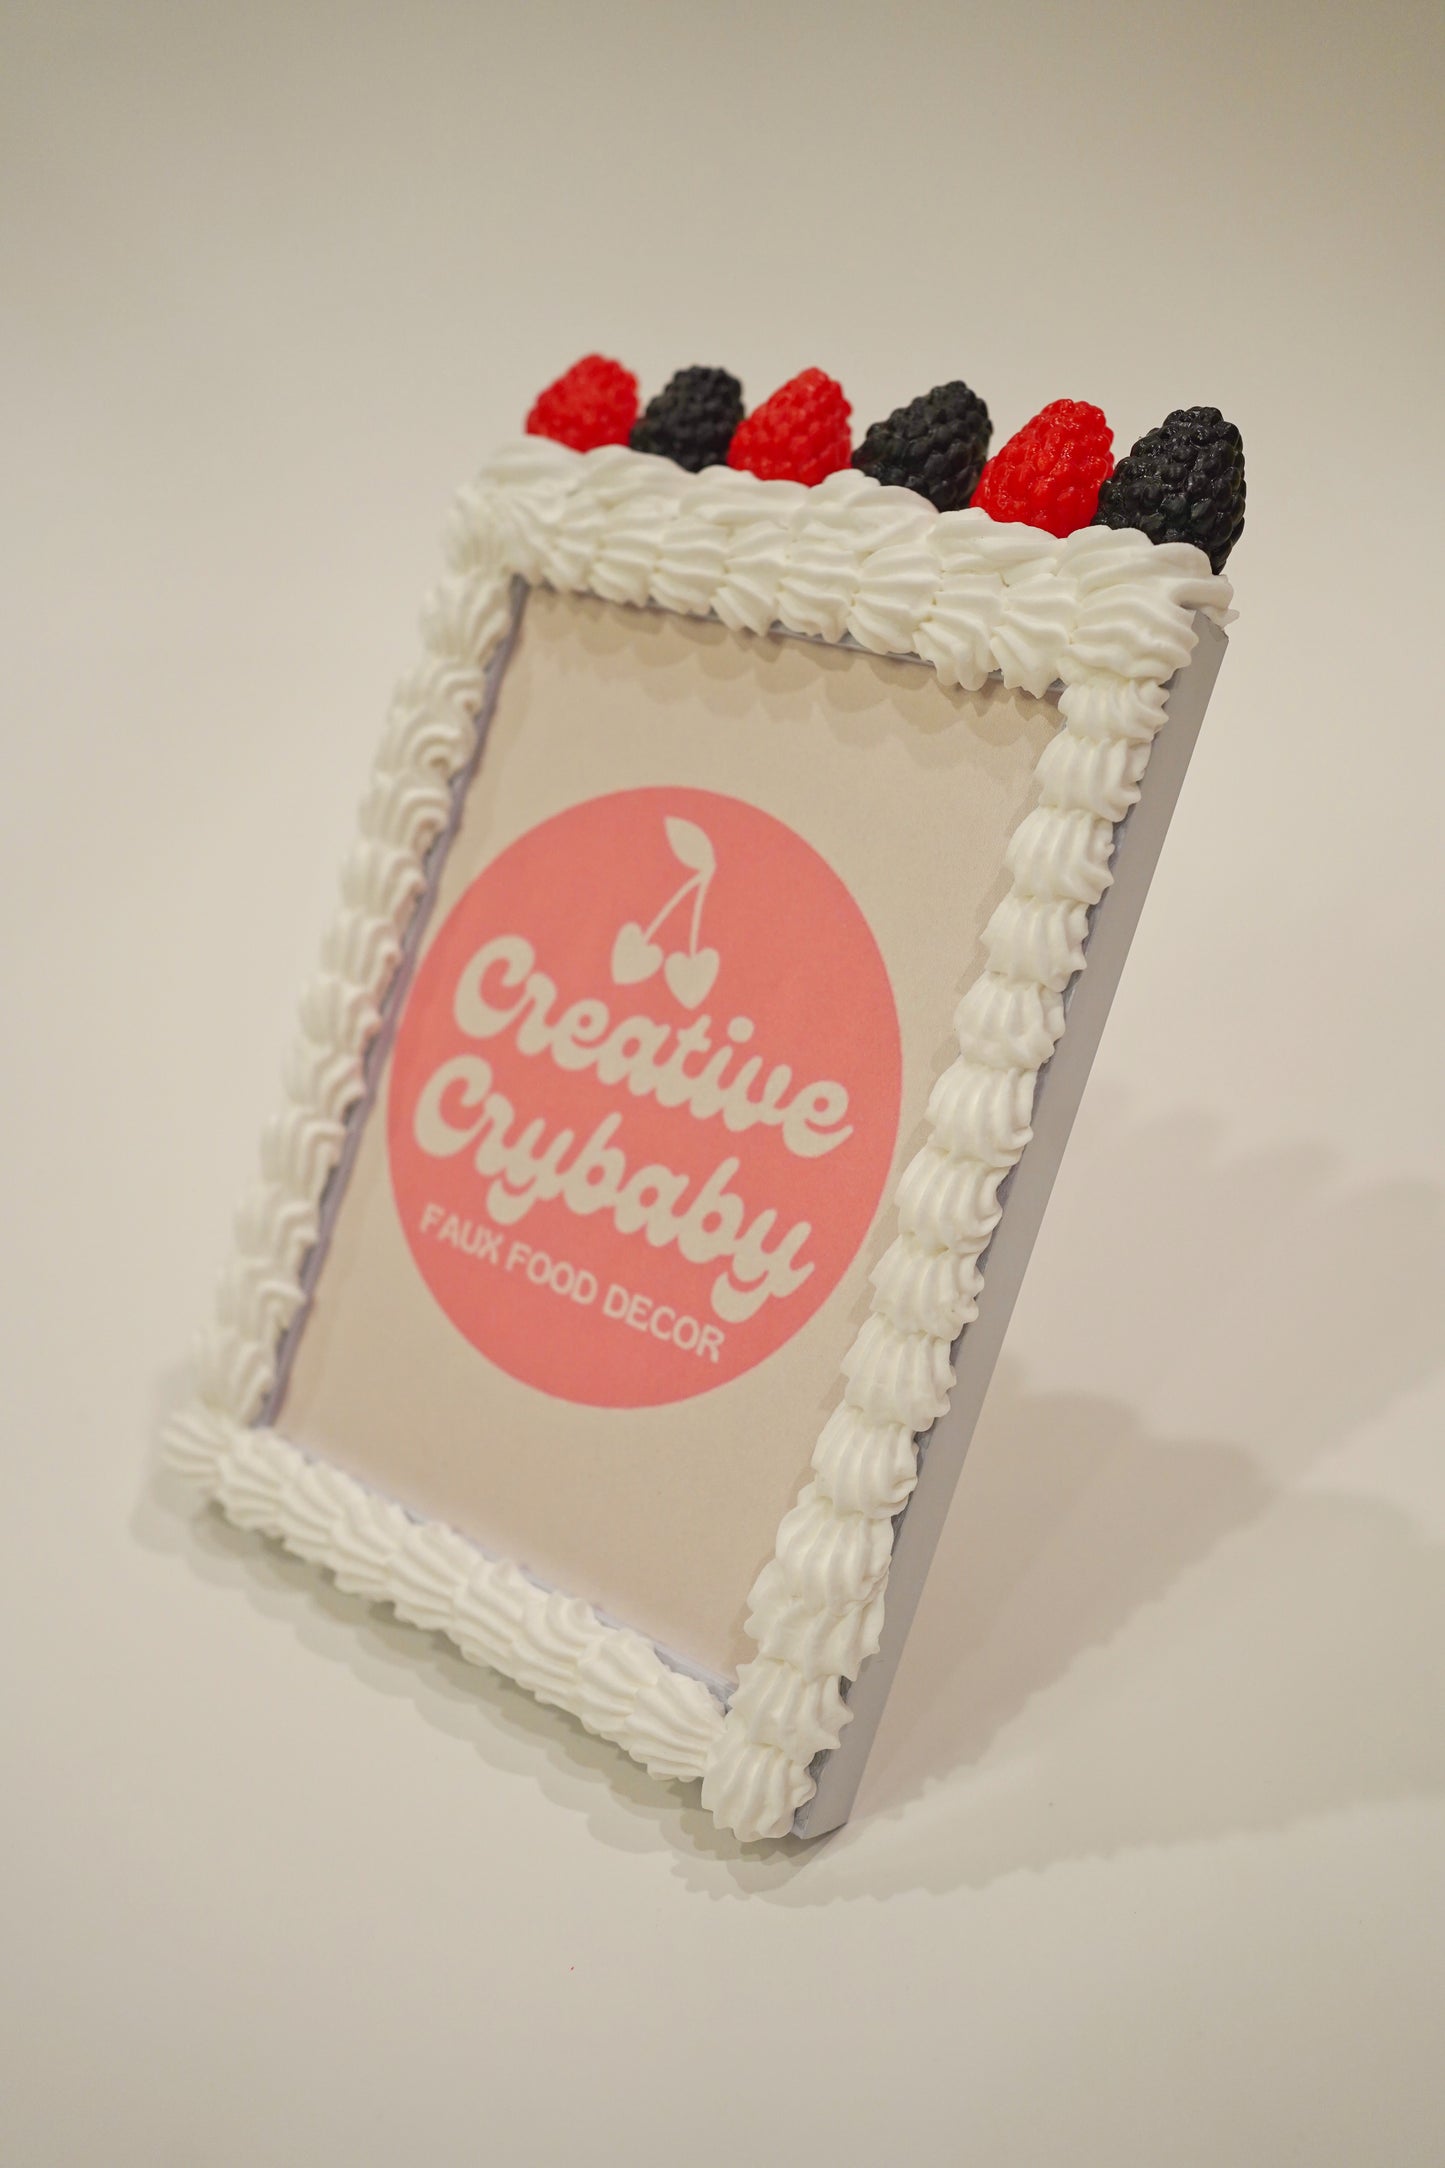 Raspberry and Blackberry Cake Picture Frame